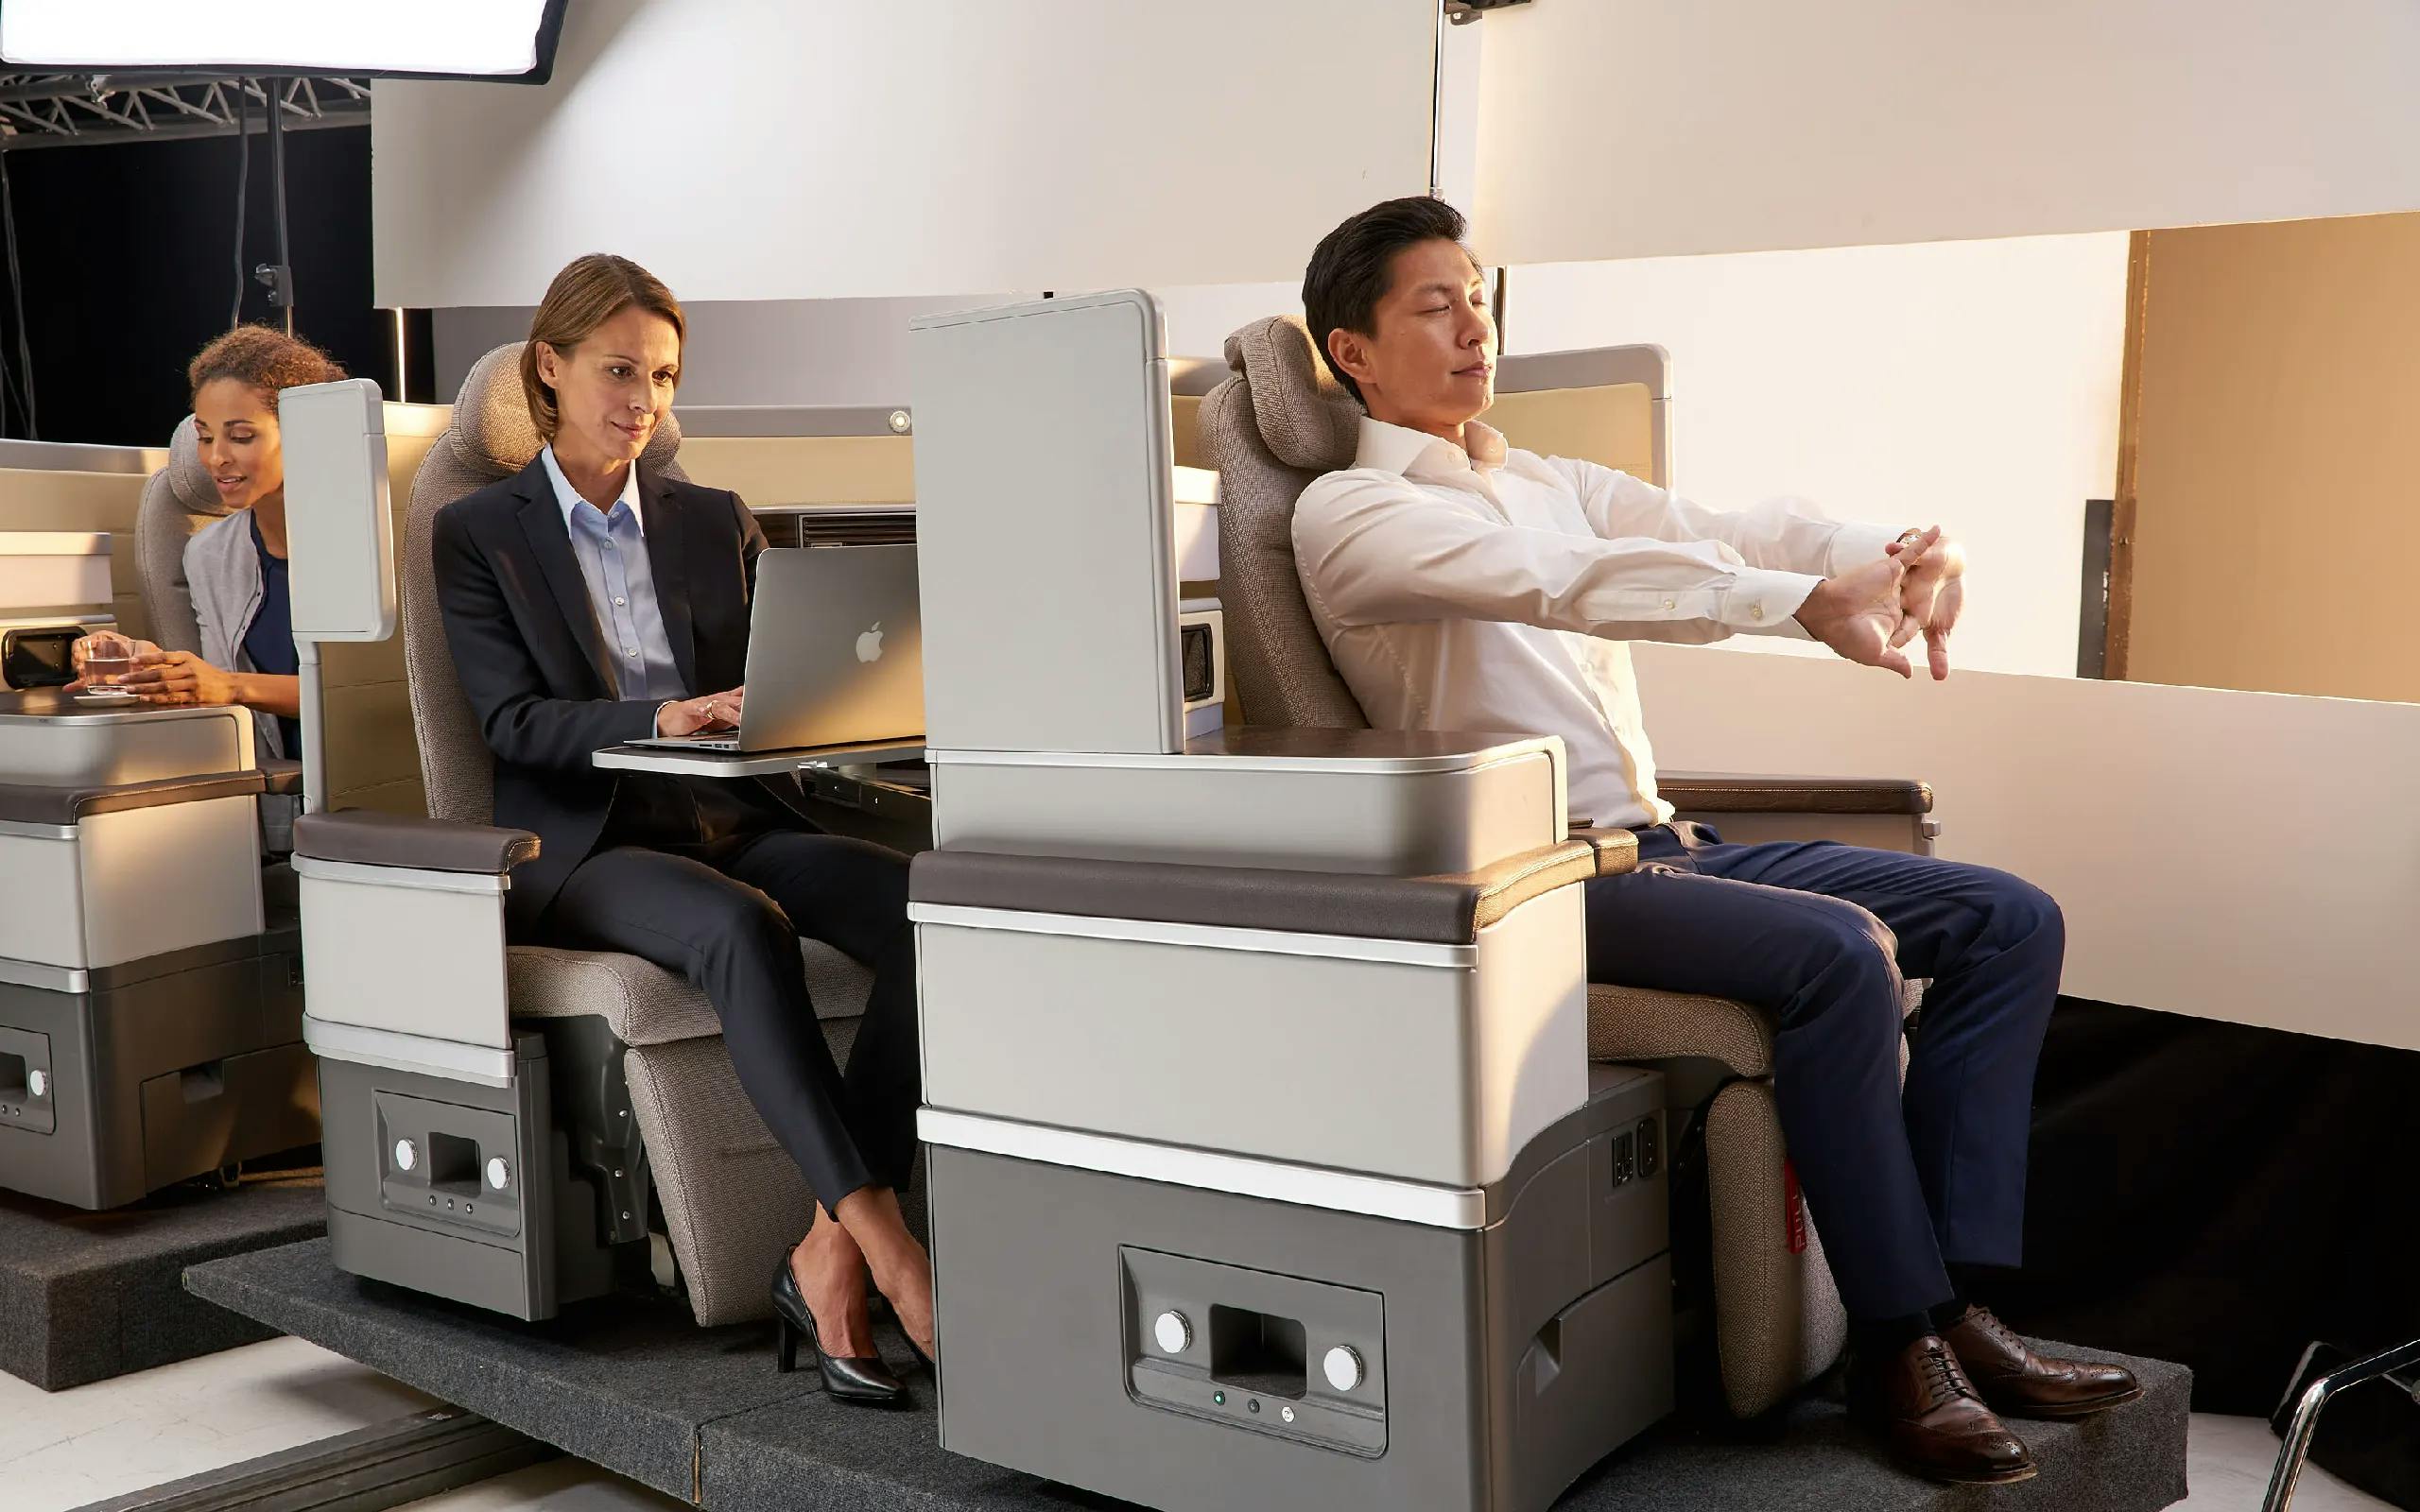 Campaign motive of Recaro: A man relaxing in airplane seats